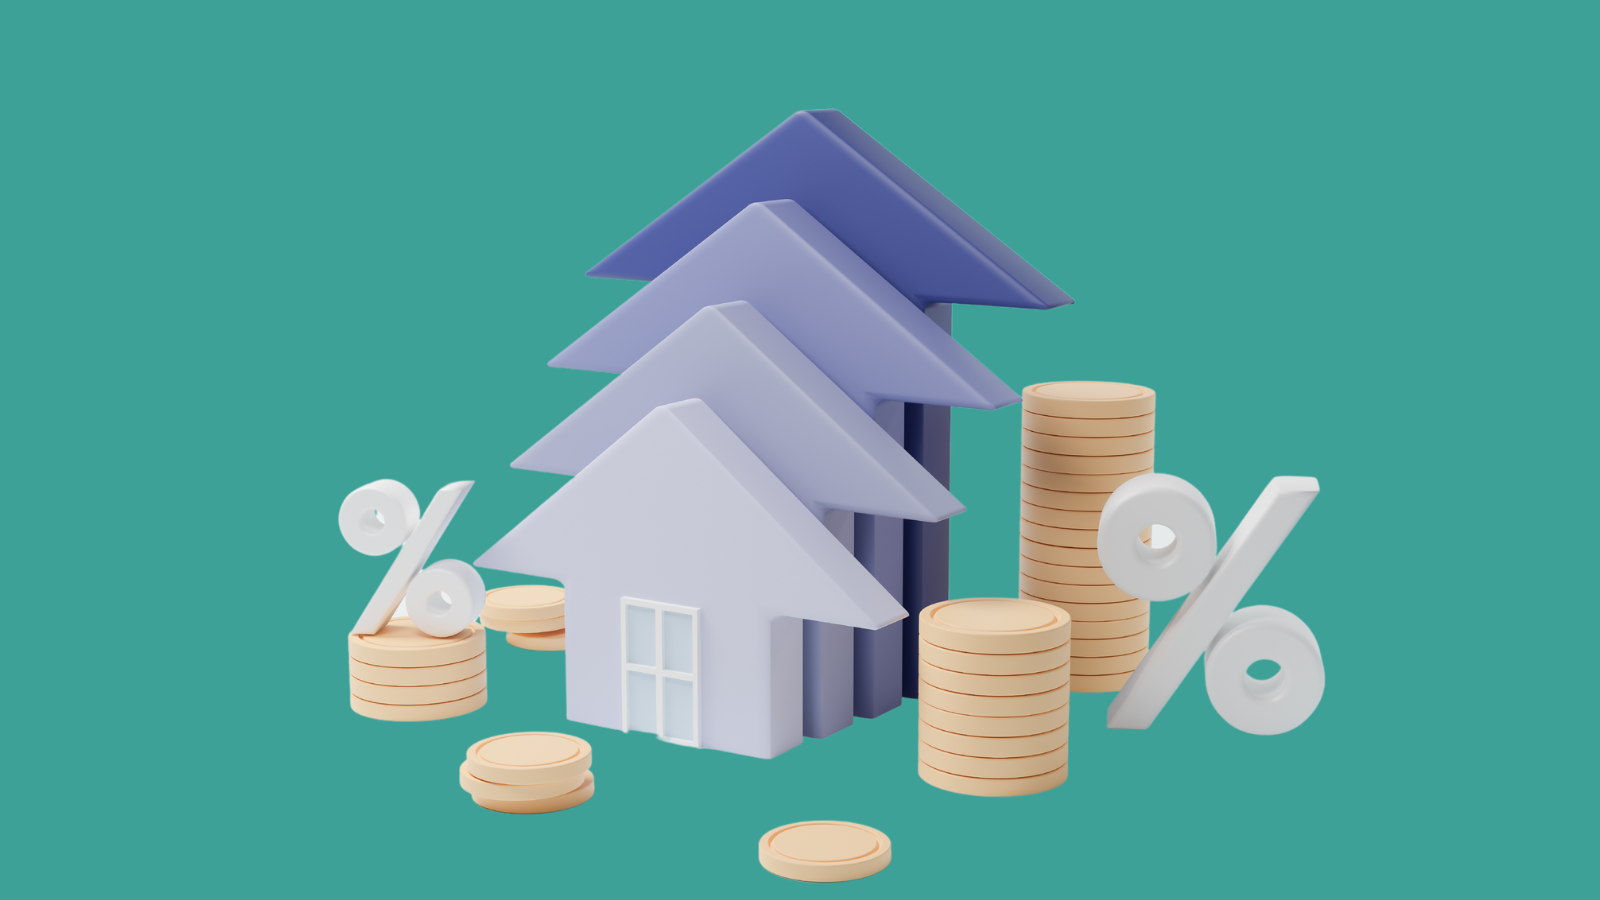 A growing house and money depiction